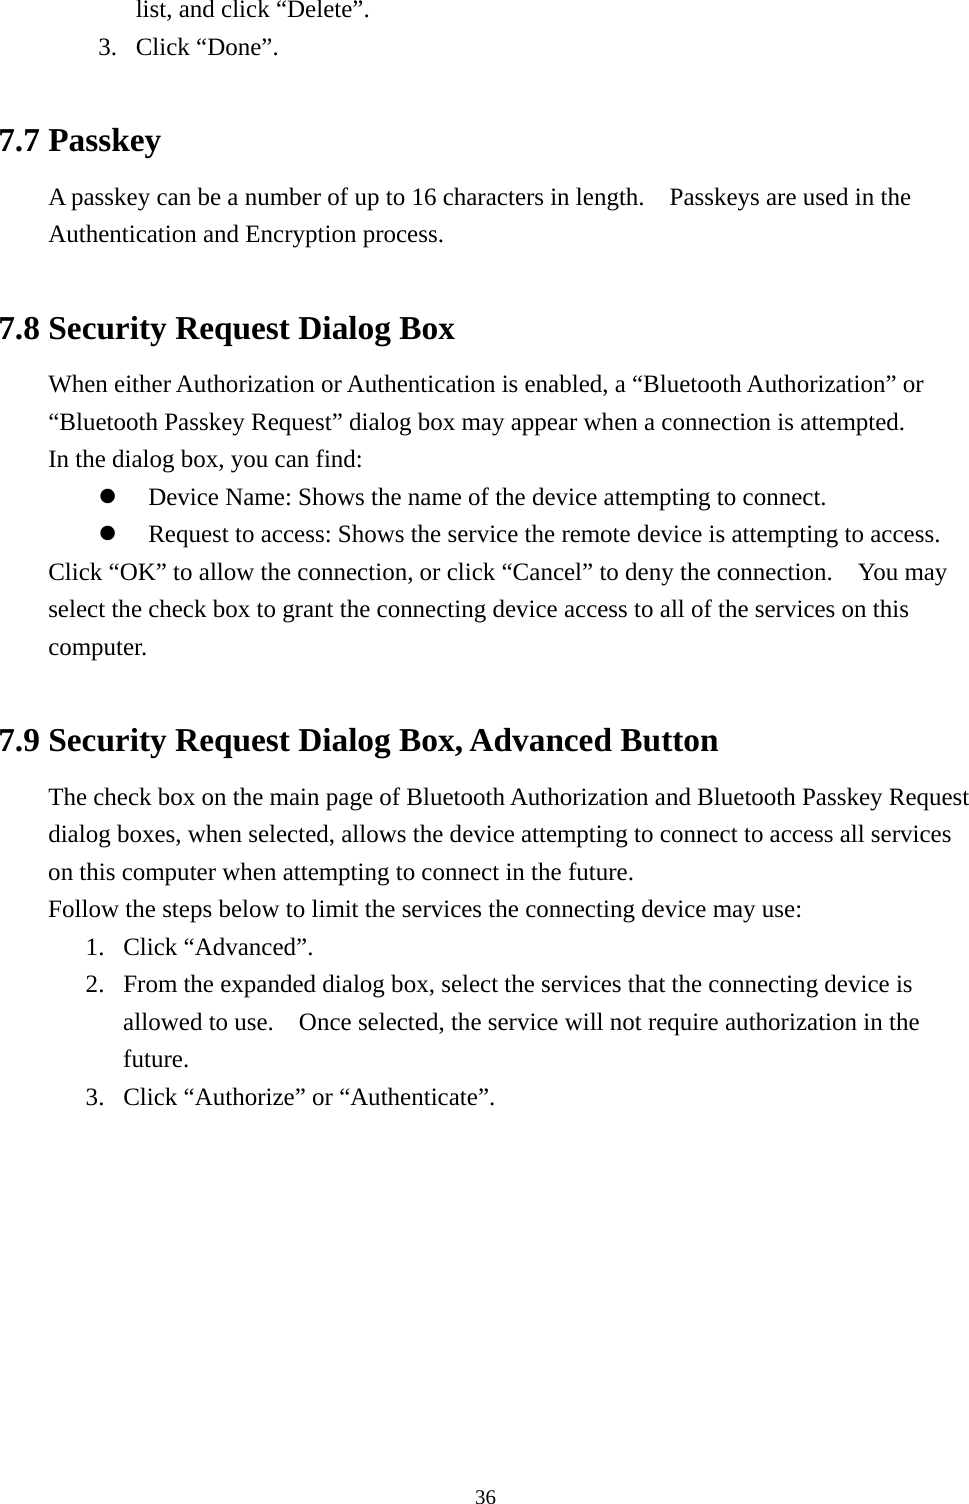   36list, and click “Delete”. 3. Click “Done”.  7.7 Passkey A passkey can be a number of up to 16 characters in length.    Passkeys are used in the Authentication and Encryption process.  7.8 Security Request Dialog Box When either Authorization or Authentication is enabled, a “Bluetooth Authorization” or “Bluetooth Passkey Request” dialog box may appear when a connection is attempted. In the dialog box, you can find:   Device Name: Shows the name of the device attempting to connect.   Request to access: Shows the service the remote device is attempting to access. Click “OK” to allow the connection, or click “Cancel” to deny the connection.    You may select the check box to grant the connecting device access to all of the services on this computer.  7.9 Security Request Dialog Box, Advanced Button The check box on the main page of Bluetooth Authorization and Bluetooth Passkey Request dialog boxes, when selected, allows the device attempting to connect to access all services on this computer when attempting to connect in the future. Follow the steps below to limit the services the connecting device may use: 1. Click “Advanced”. 2.  From the expanded dialog box, select the services that the connecting device is allowed to use.    Once selected, the service will not require authorization in the future. 3.  Click “Authorize” or “Authenticate”. 